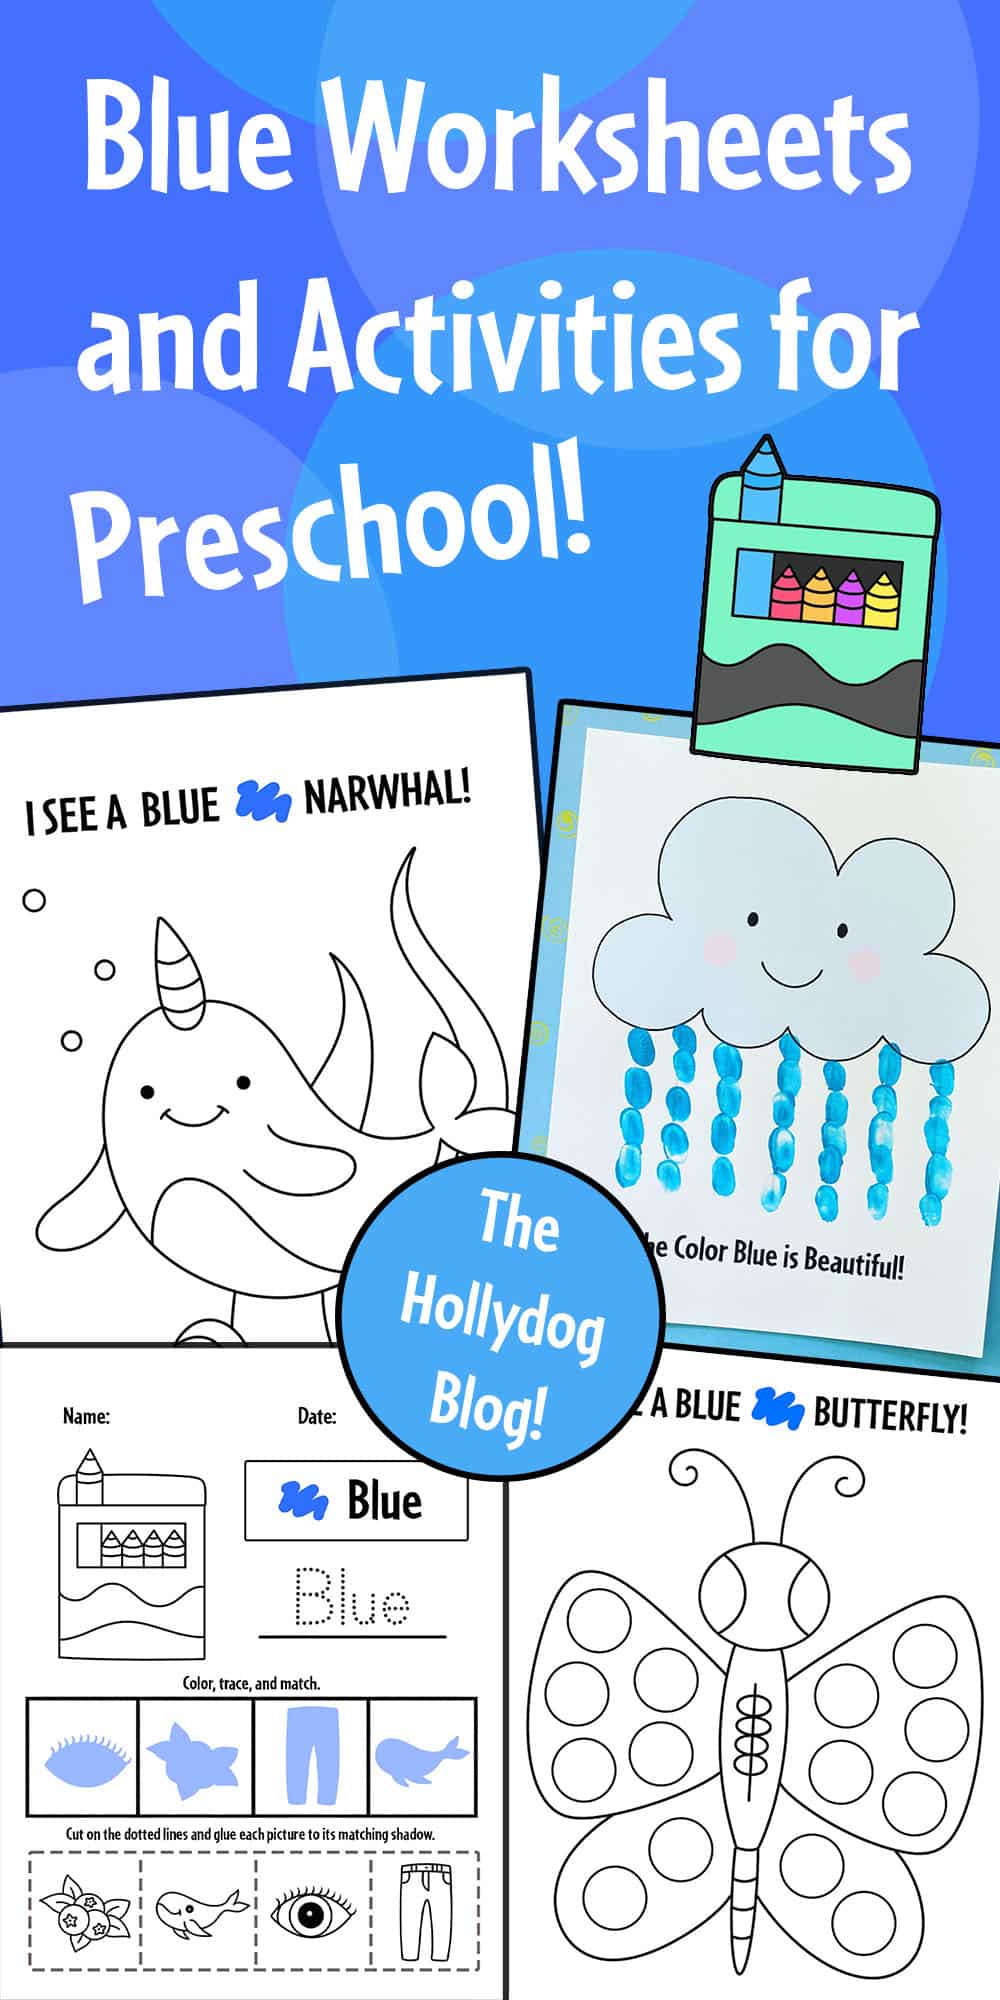 Blue Color Activities and Worksheets for Preschool!